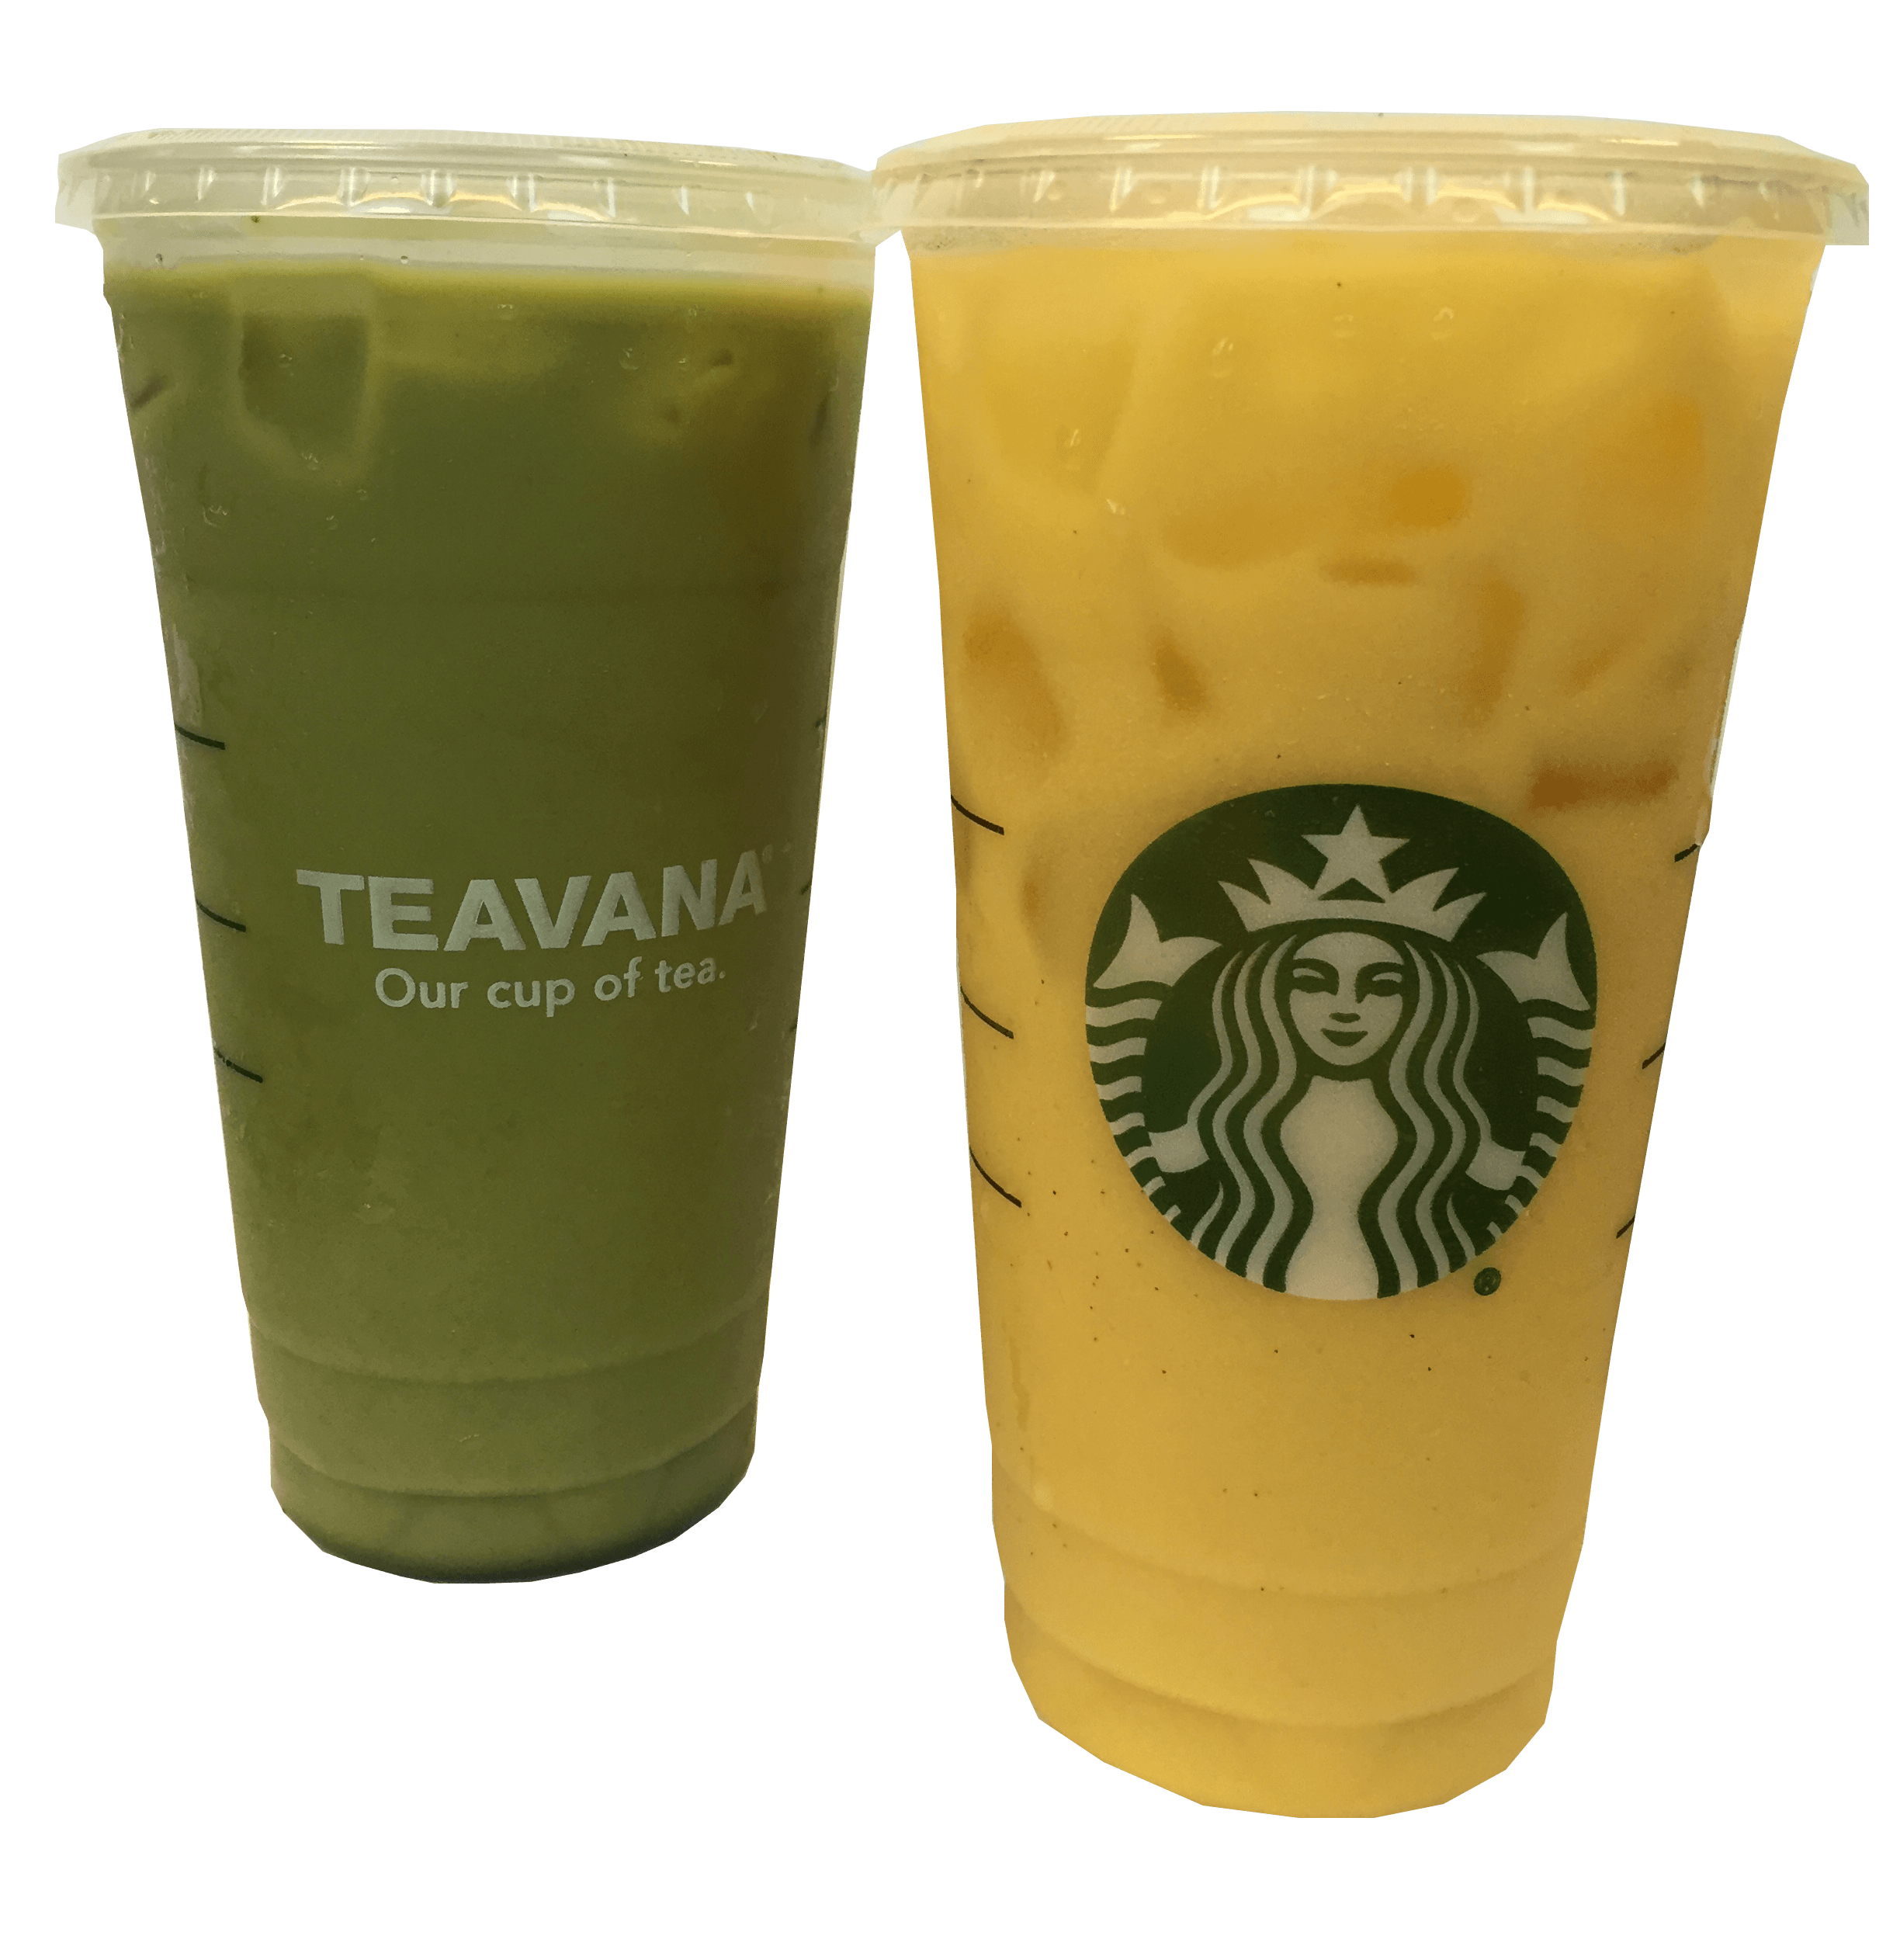 Green and Yellow Drink Logo - Starbucks Has Two More 'Secret Drinks' to Try | Real Simple